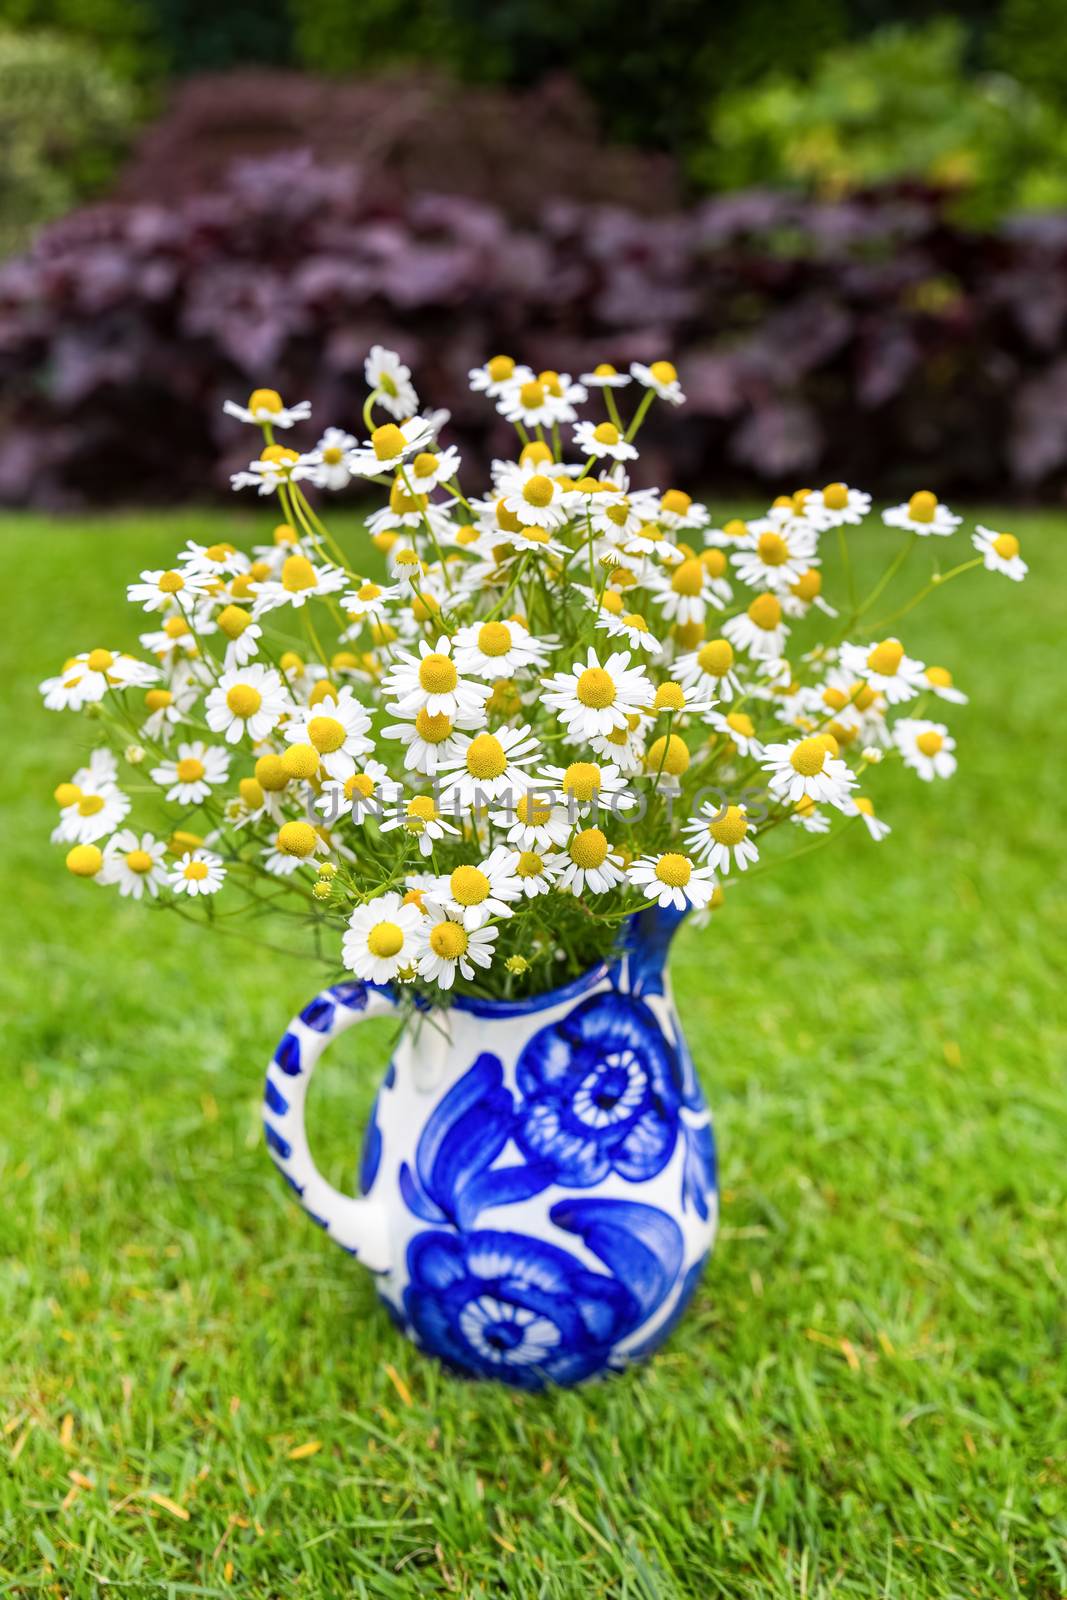 Flowering white camomile on blue vase outdoors by BenSchonewille